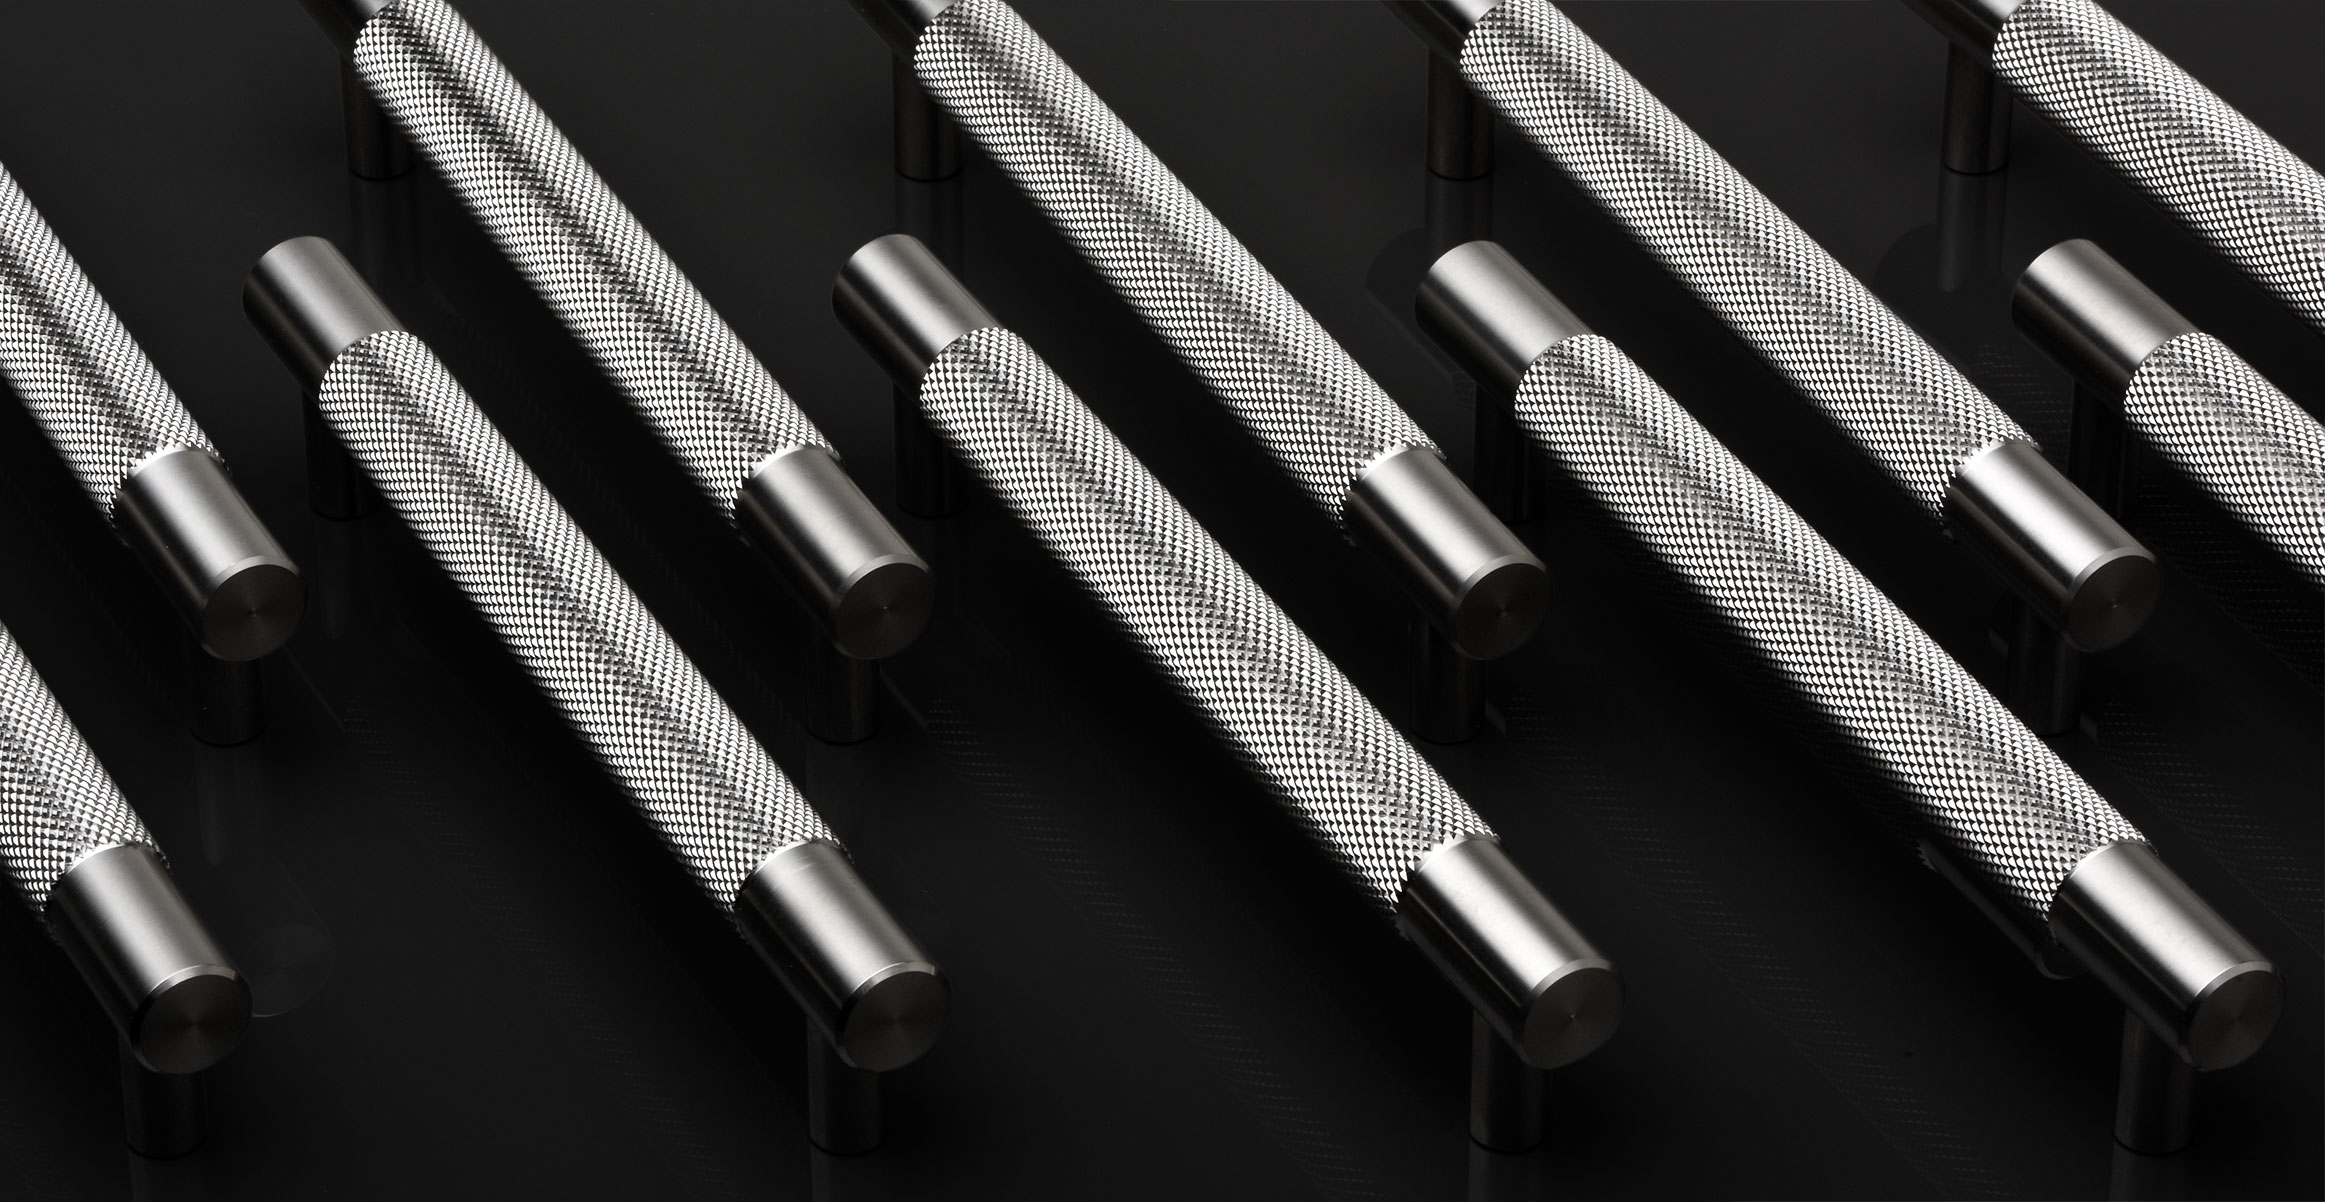 Kor cabinet pulls with knurled texture close up